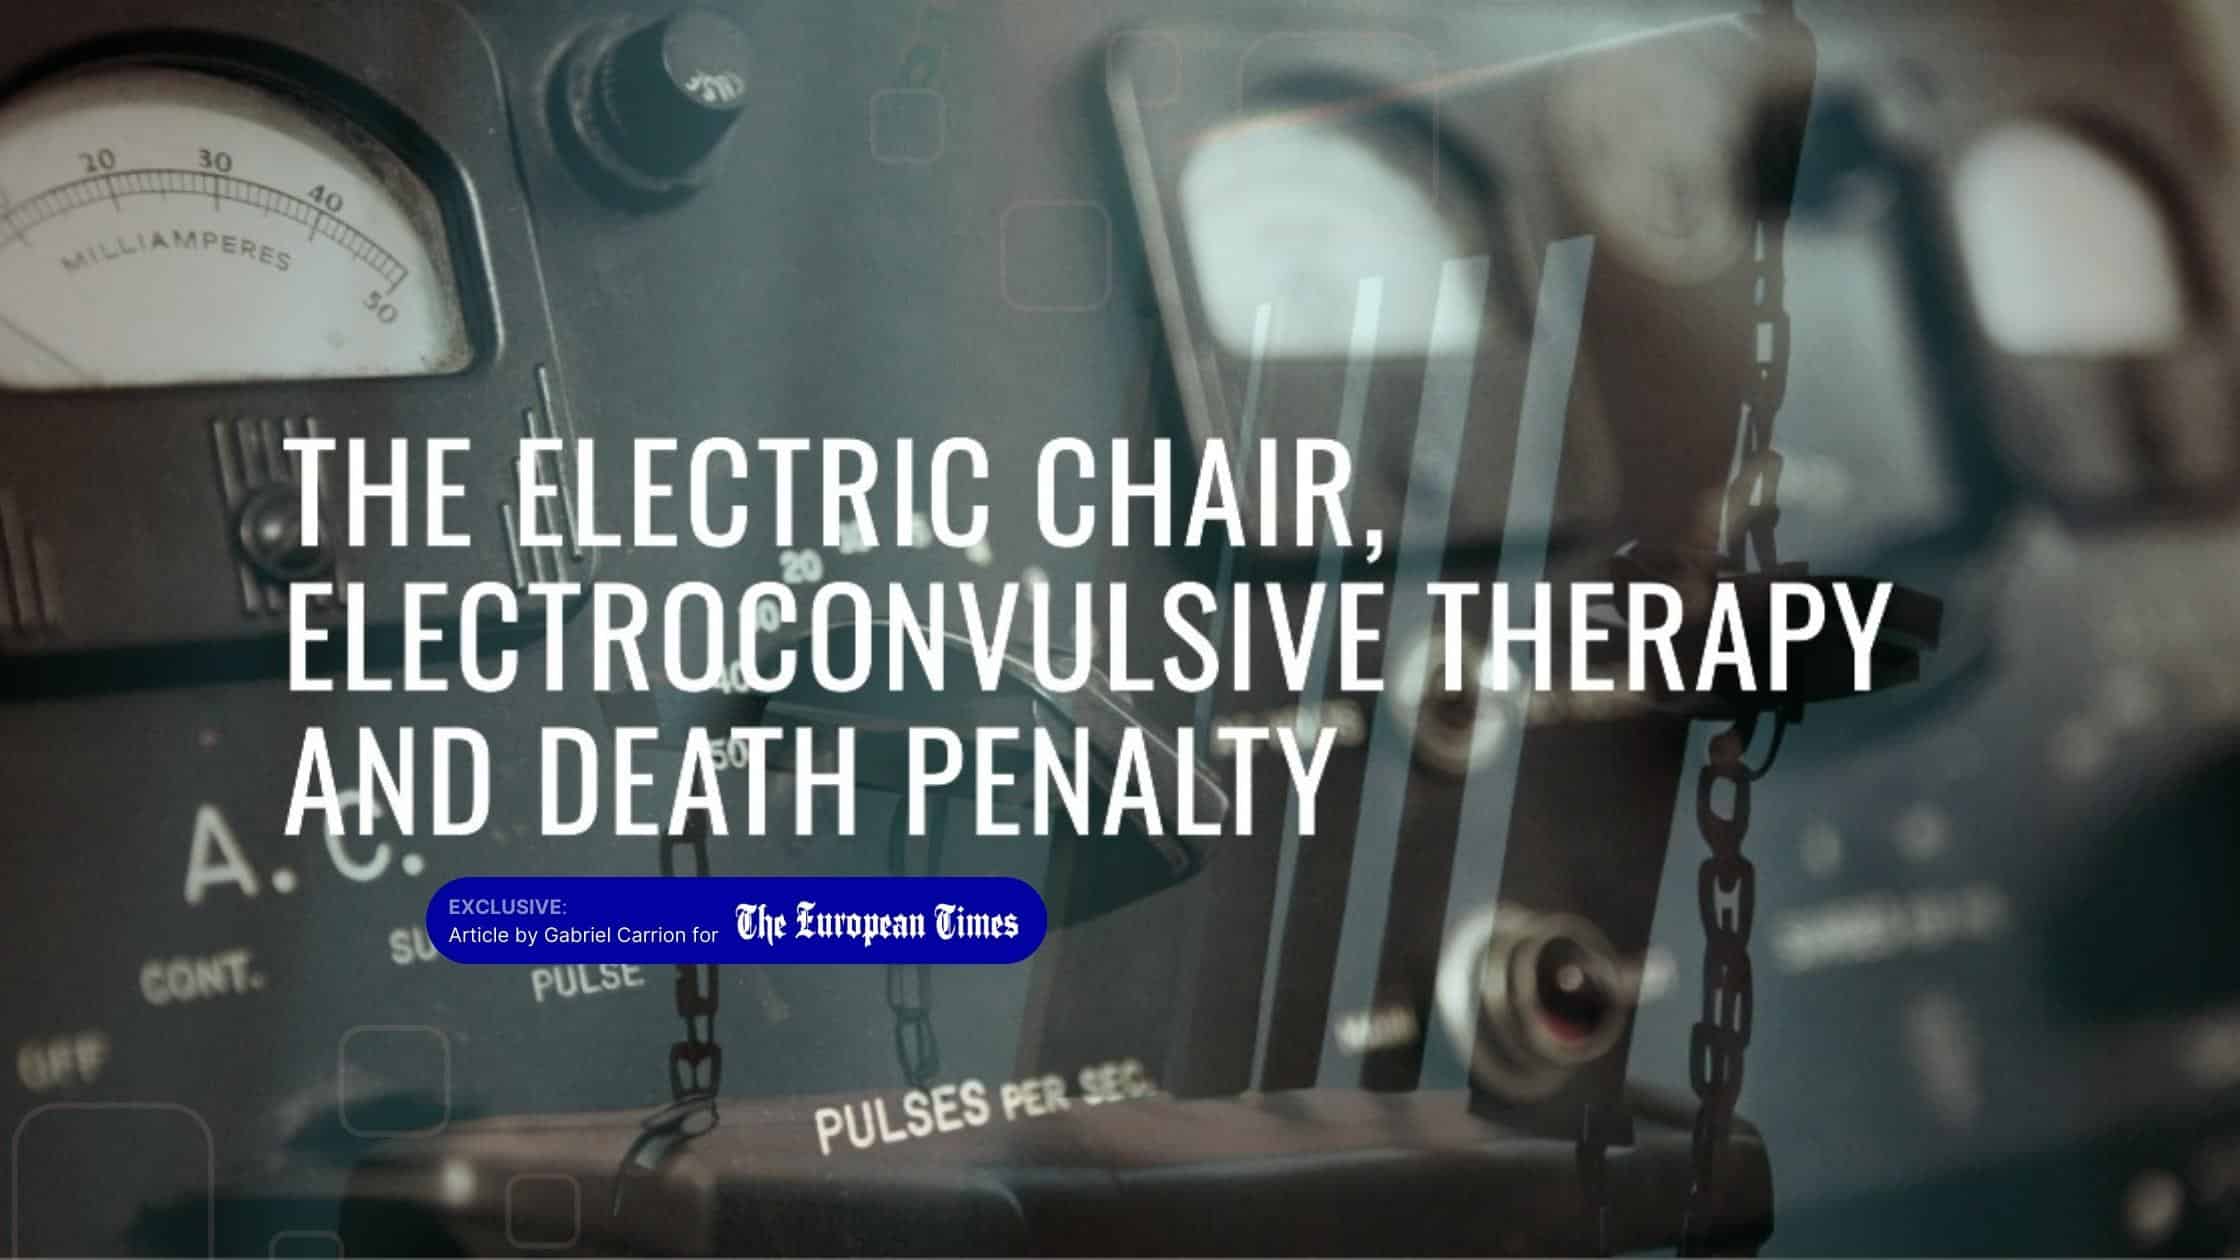 The electric chair, psychiatric electroconvulsive therapy (ECT) and the death penalty